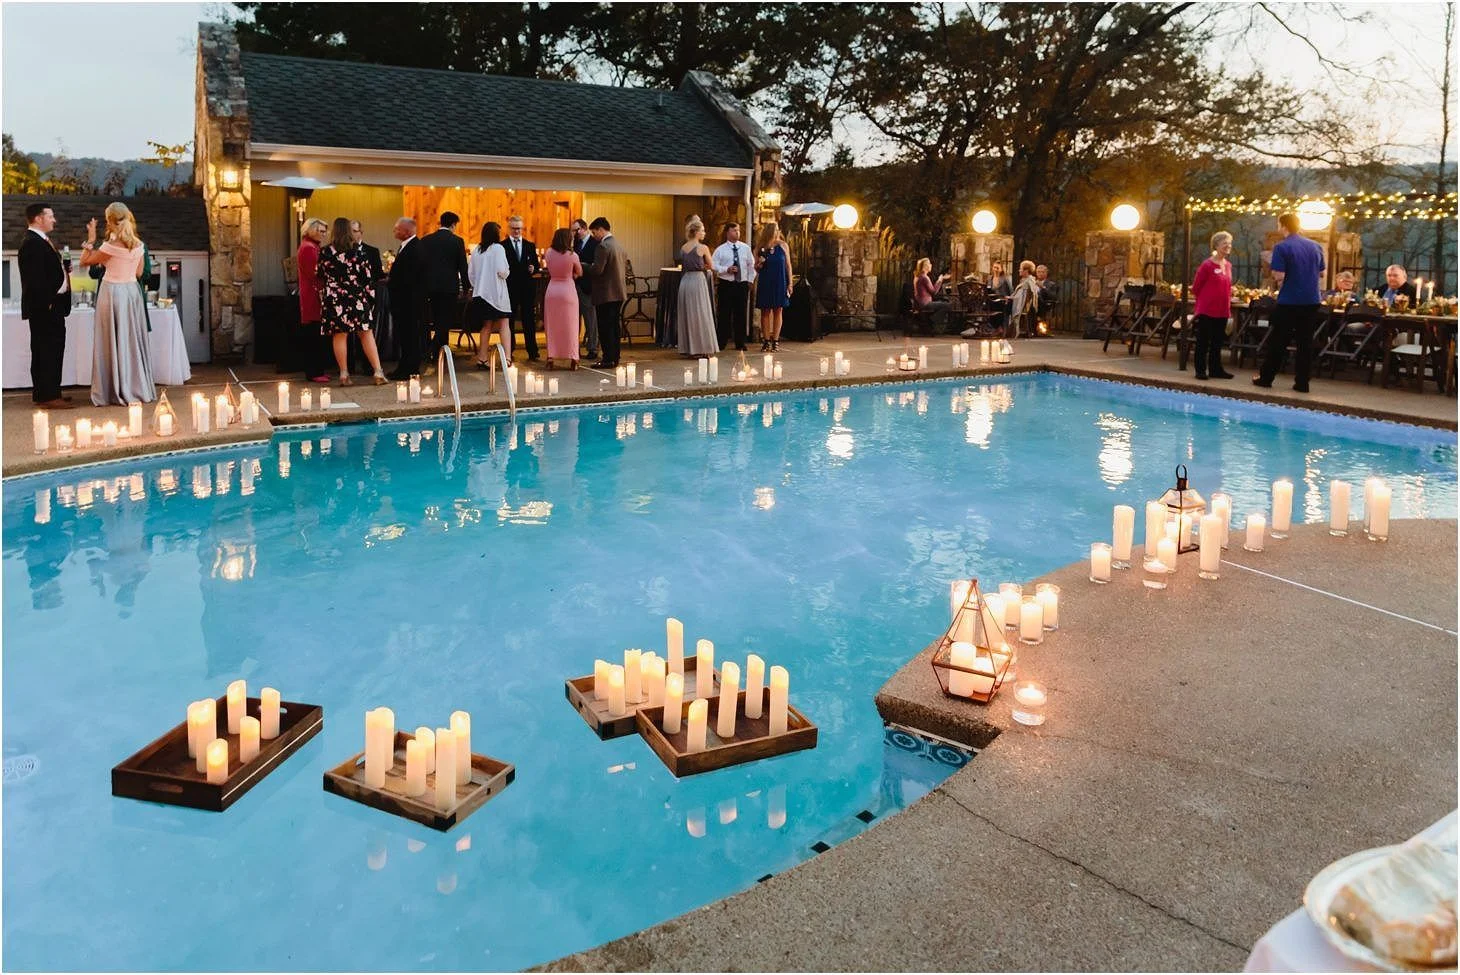 Poolside Wedding Decor Ideas to Bookmark for Your Summer Festivities